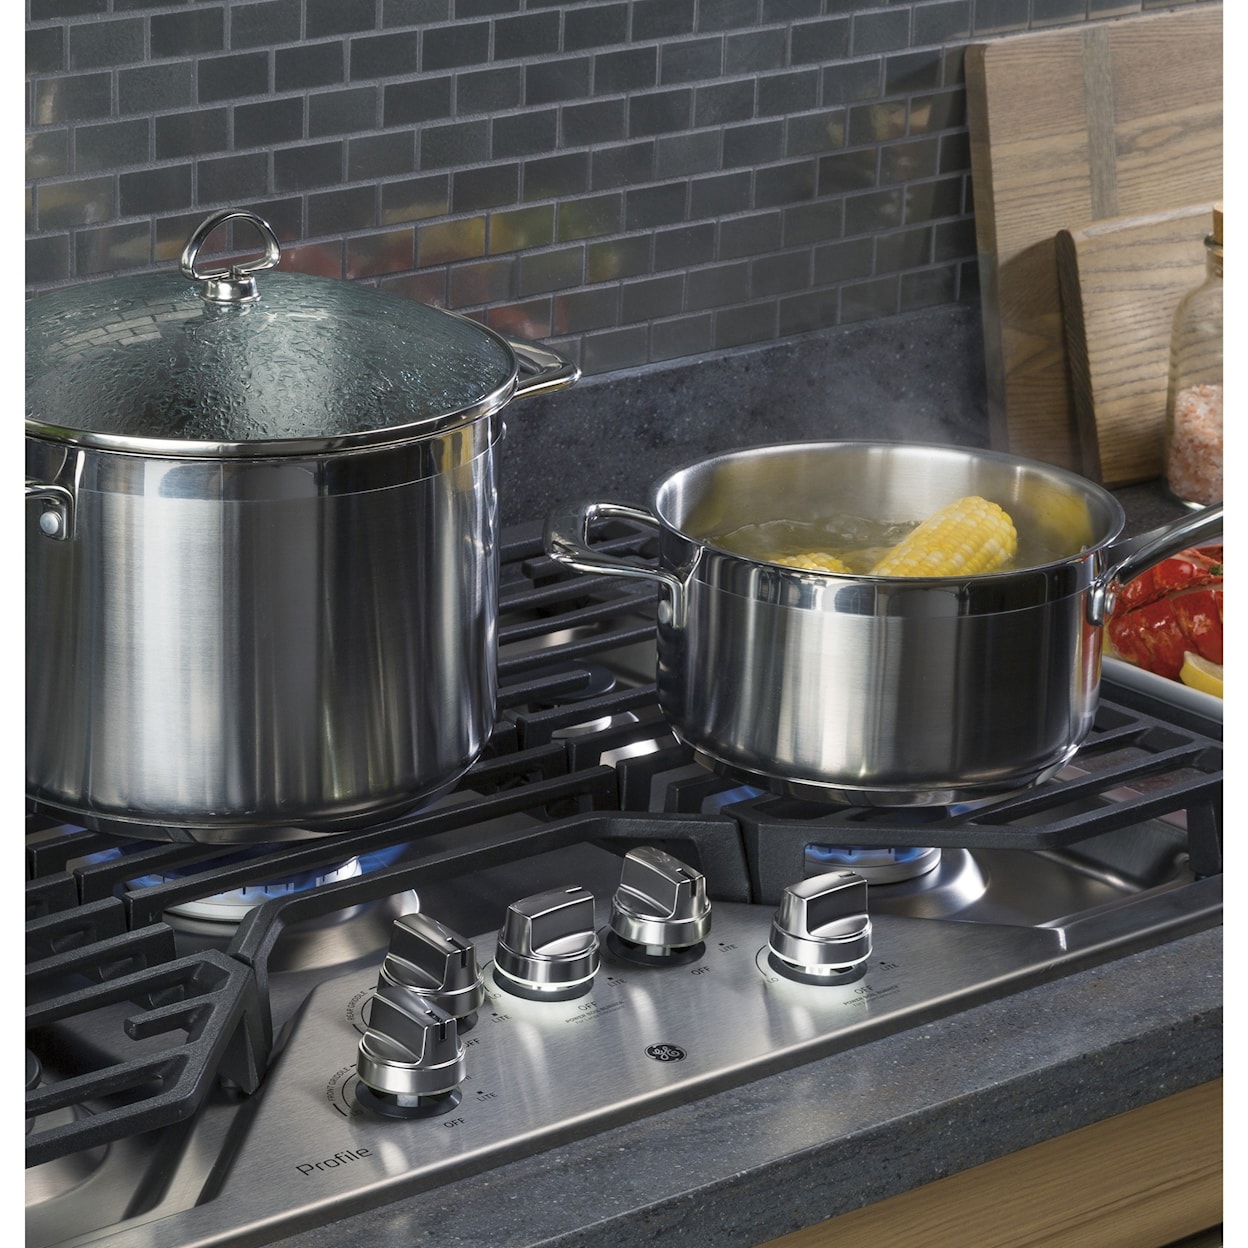 GE Appliances Profile Gas Cooktops Profile™ 30" Built-In Gas Cooktop